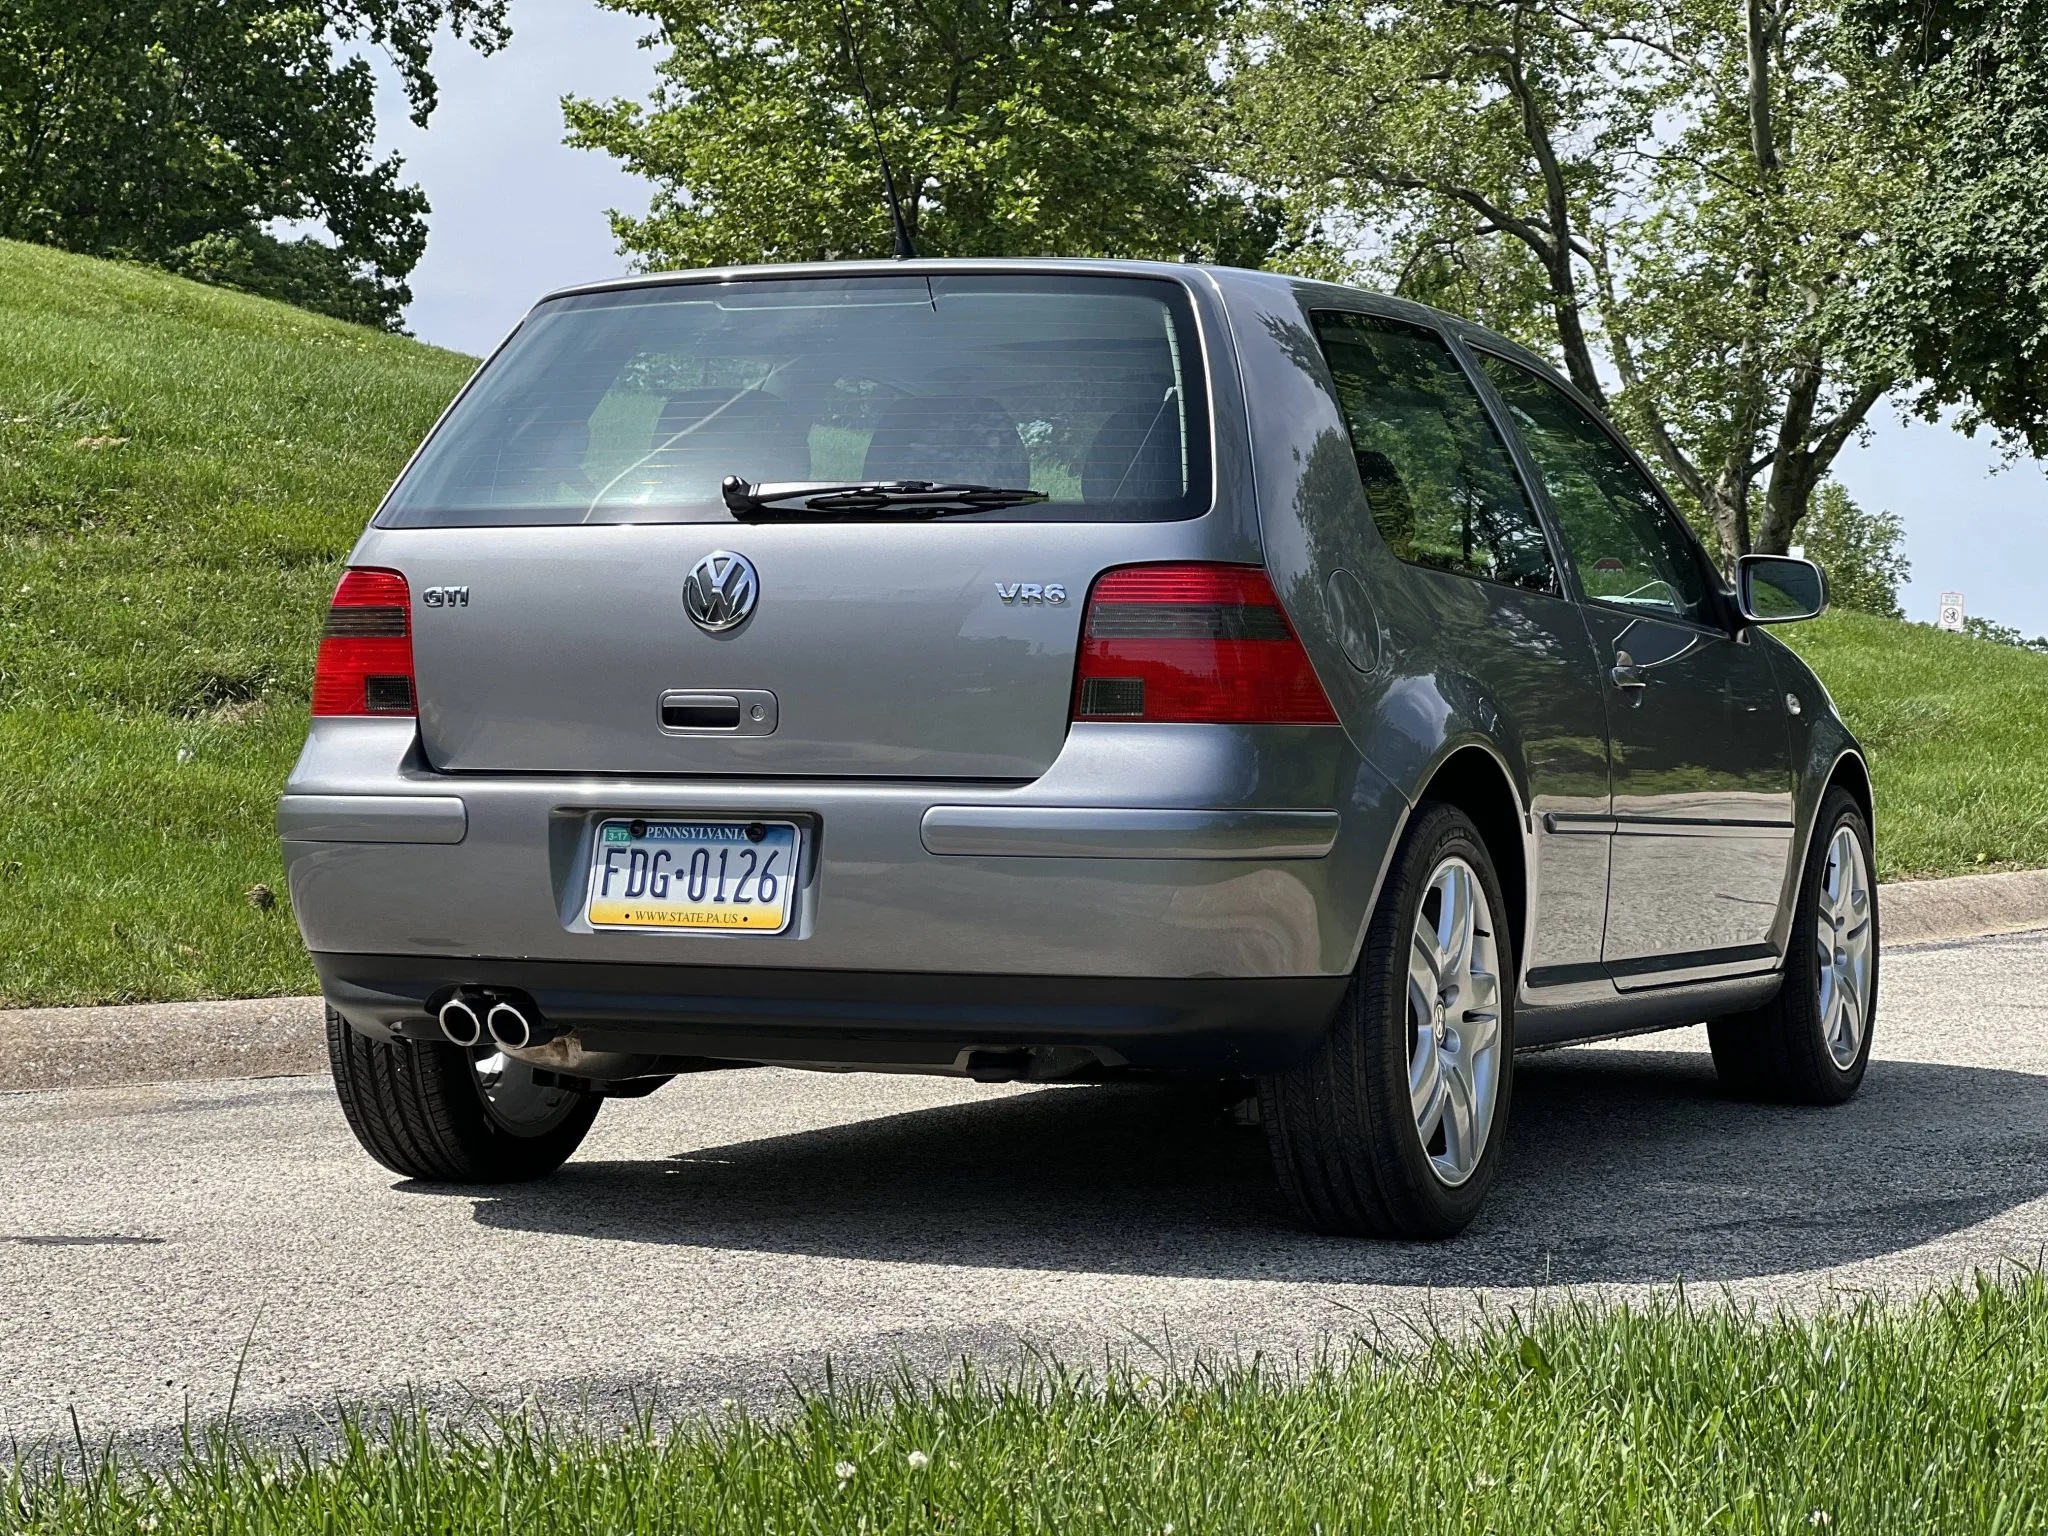 2003 Volkswagen GTI VR6 With 1,300 Mi on the Odo Comes Out of Hiding, It's  a Time Capsule - autoevolution